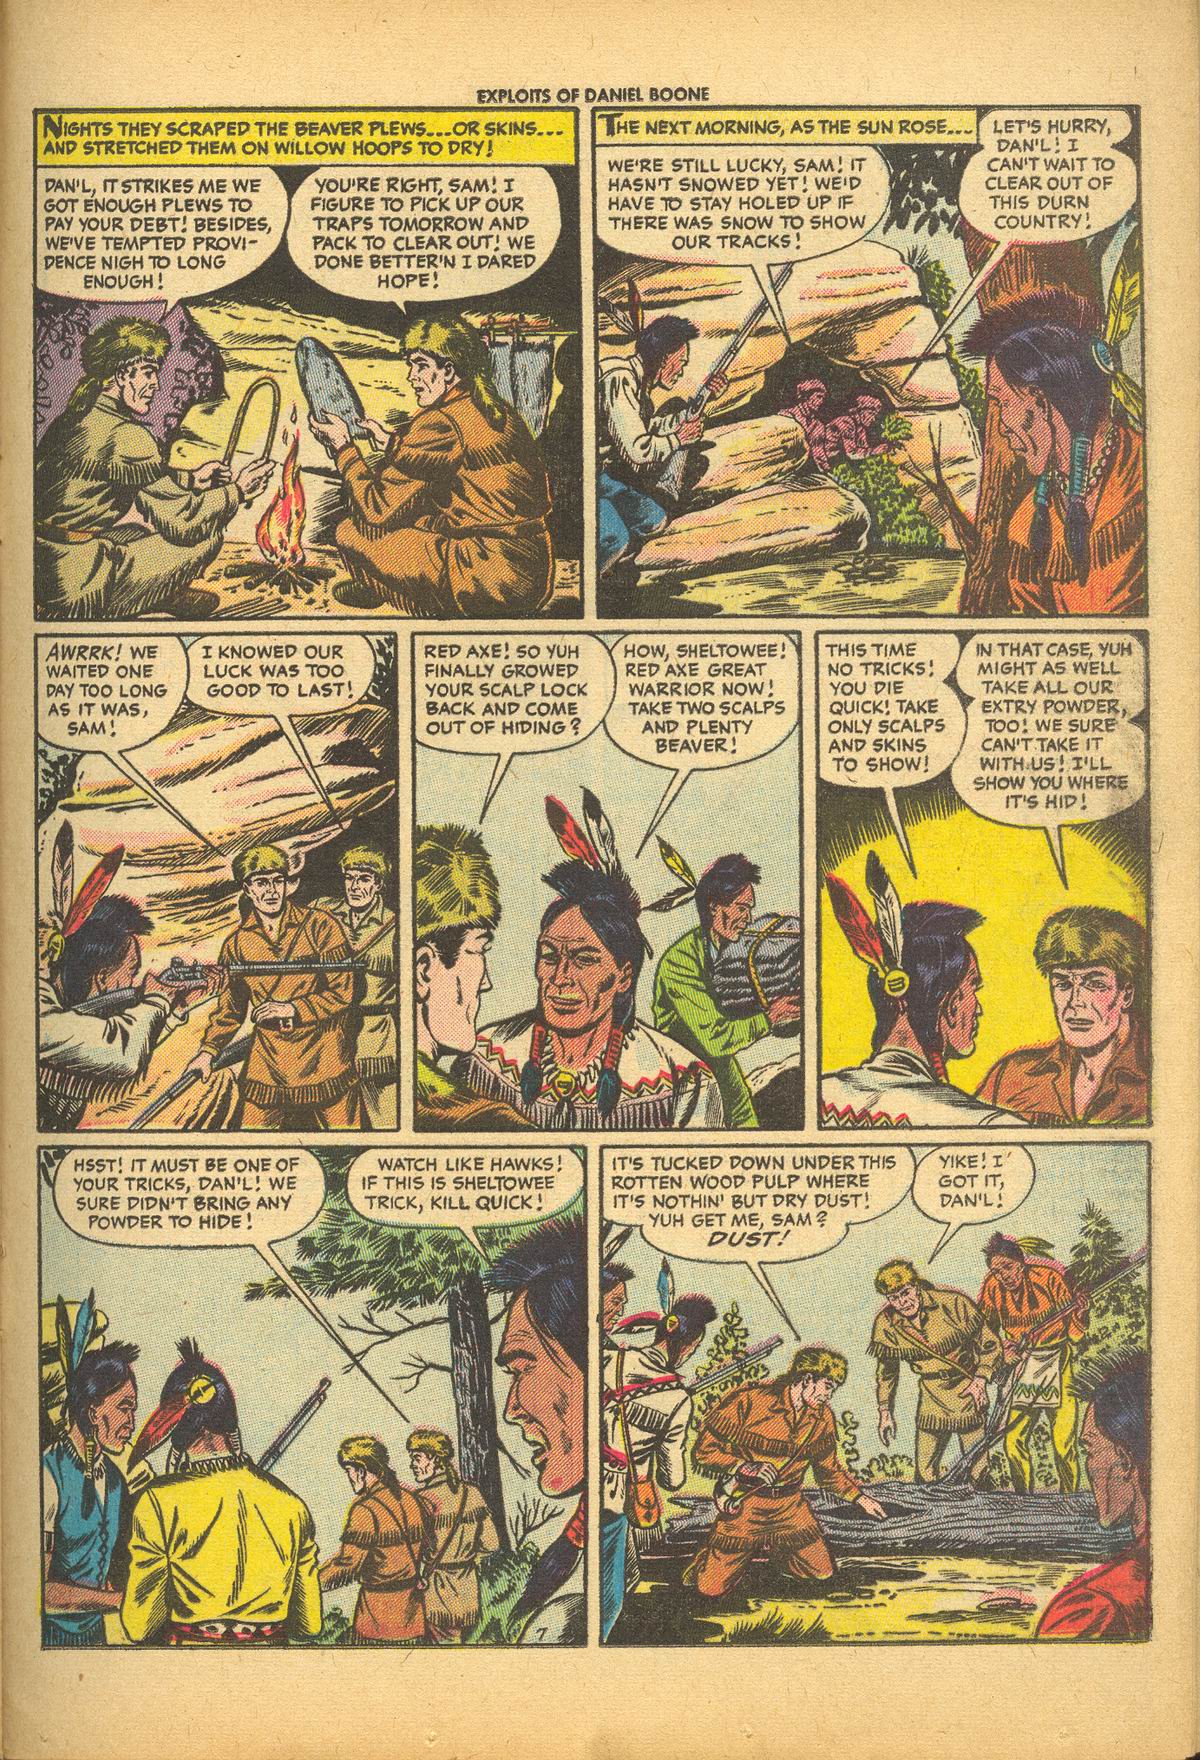 Read online Exploits of Daniel Boone comic -  Issue #3 - 25